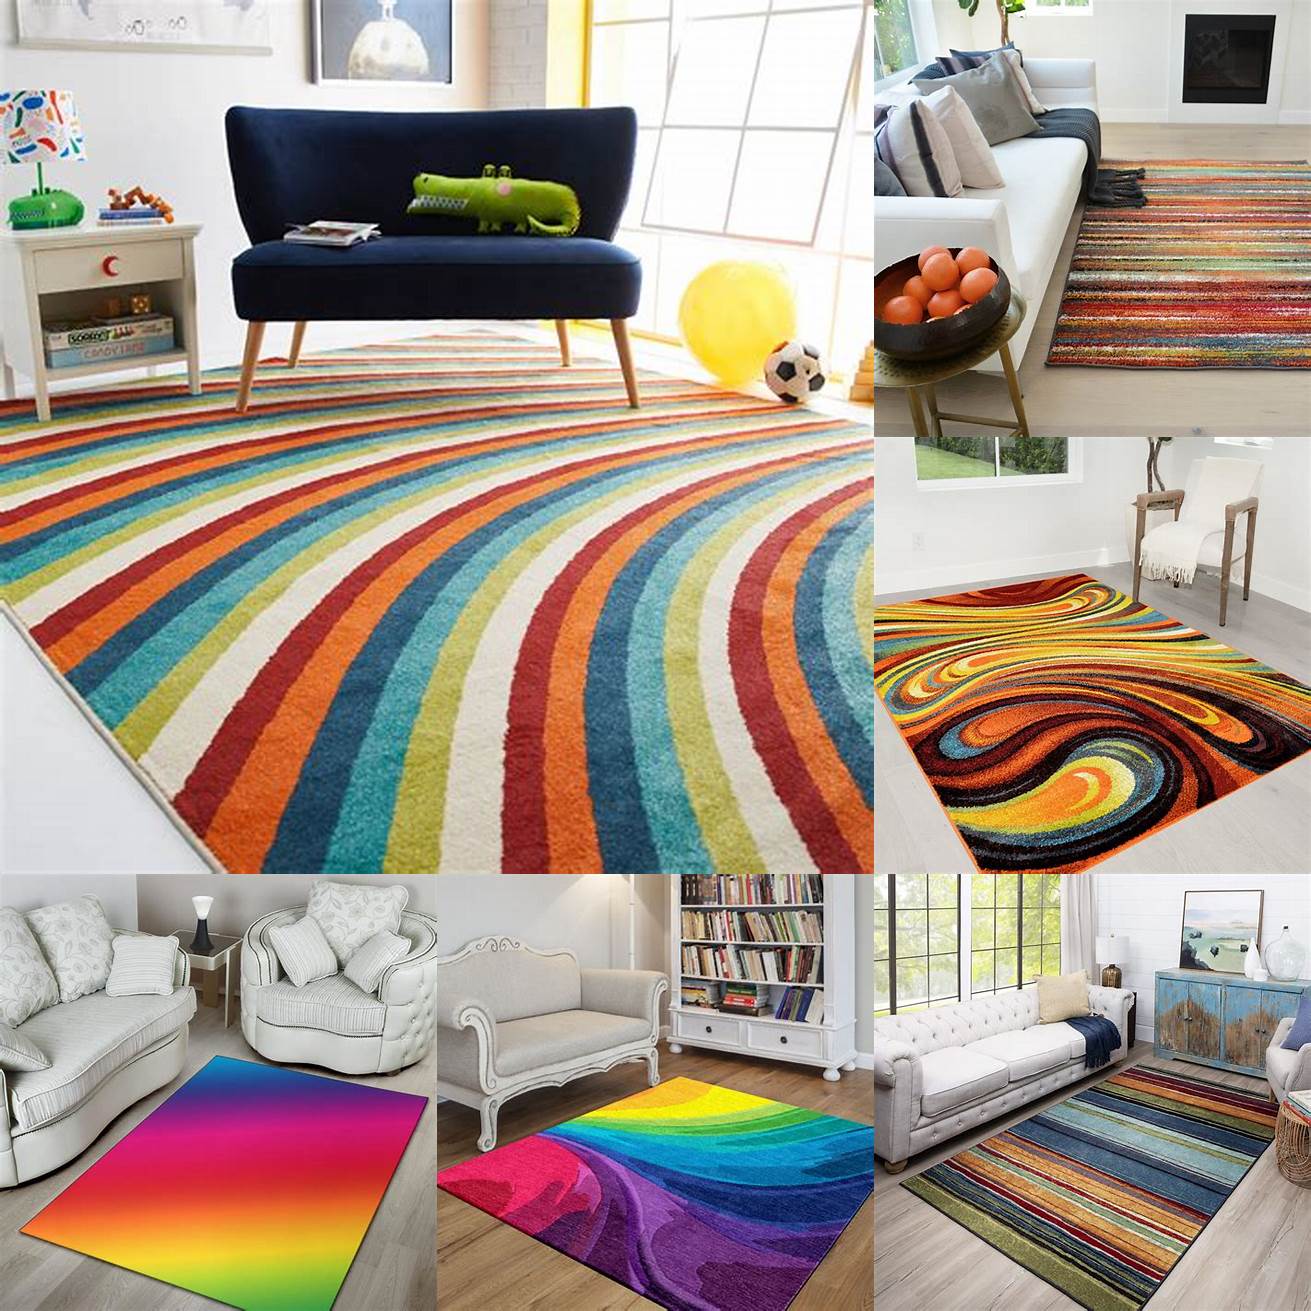 The Rainbow Area Rug is a subtle way to add some color to your home decor